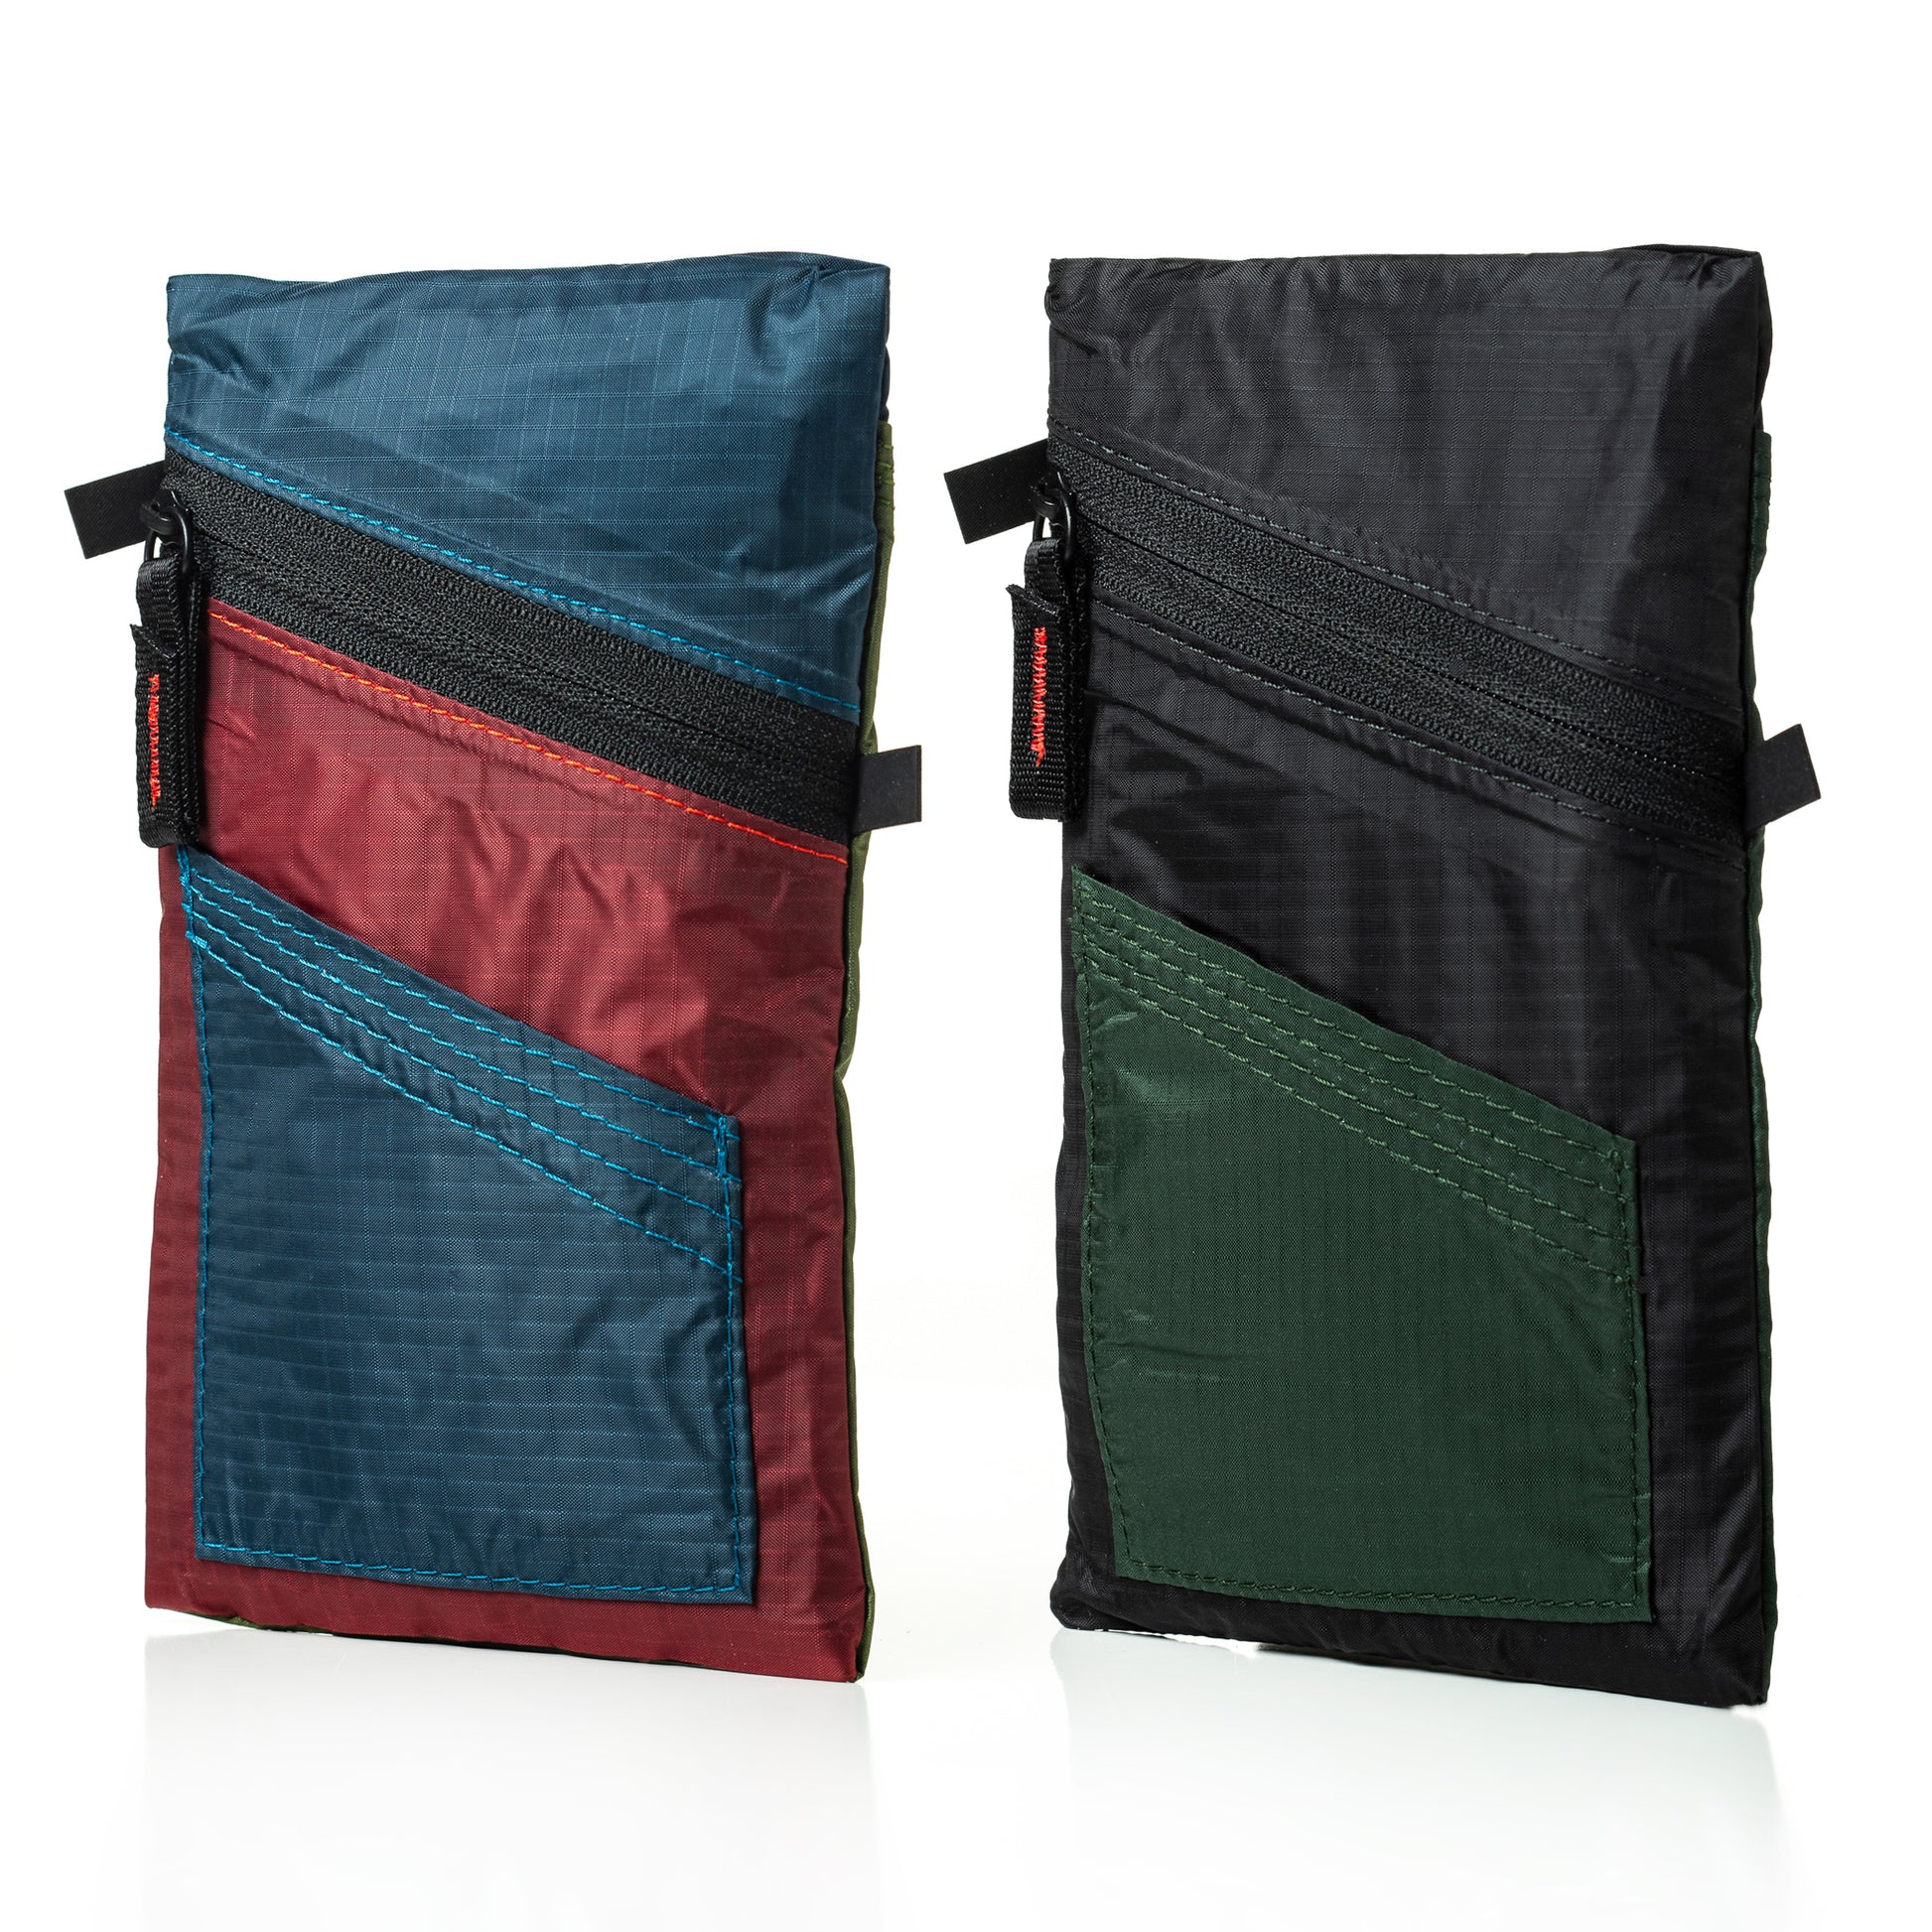 Two color options of Fierce Hazel Echelon Ultralightweight weatherproof seam-sealed cycling pouch sustainable zipper phone pouch 30D PU + silicon-coated nylon